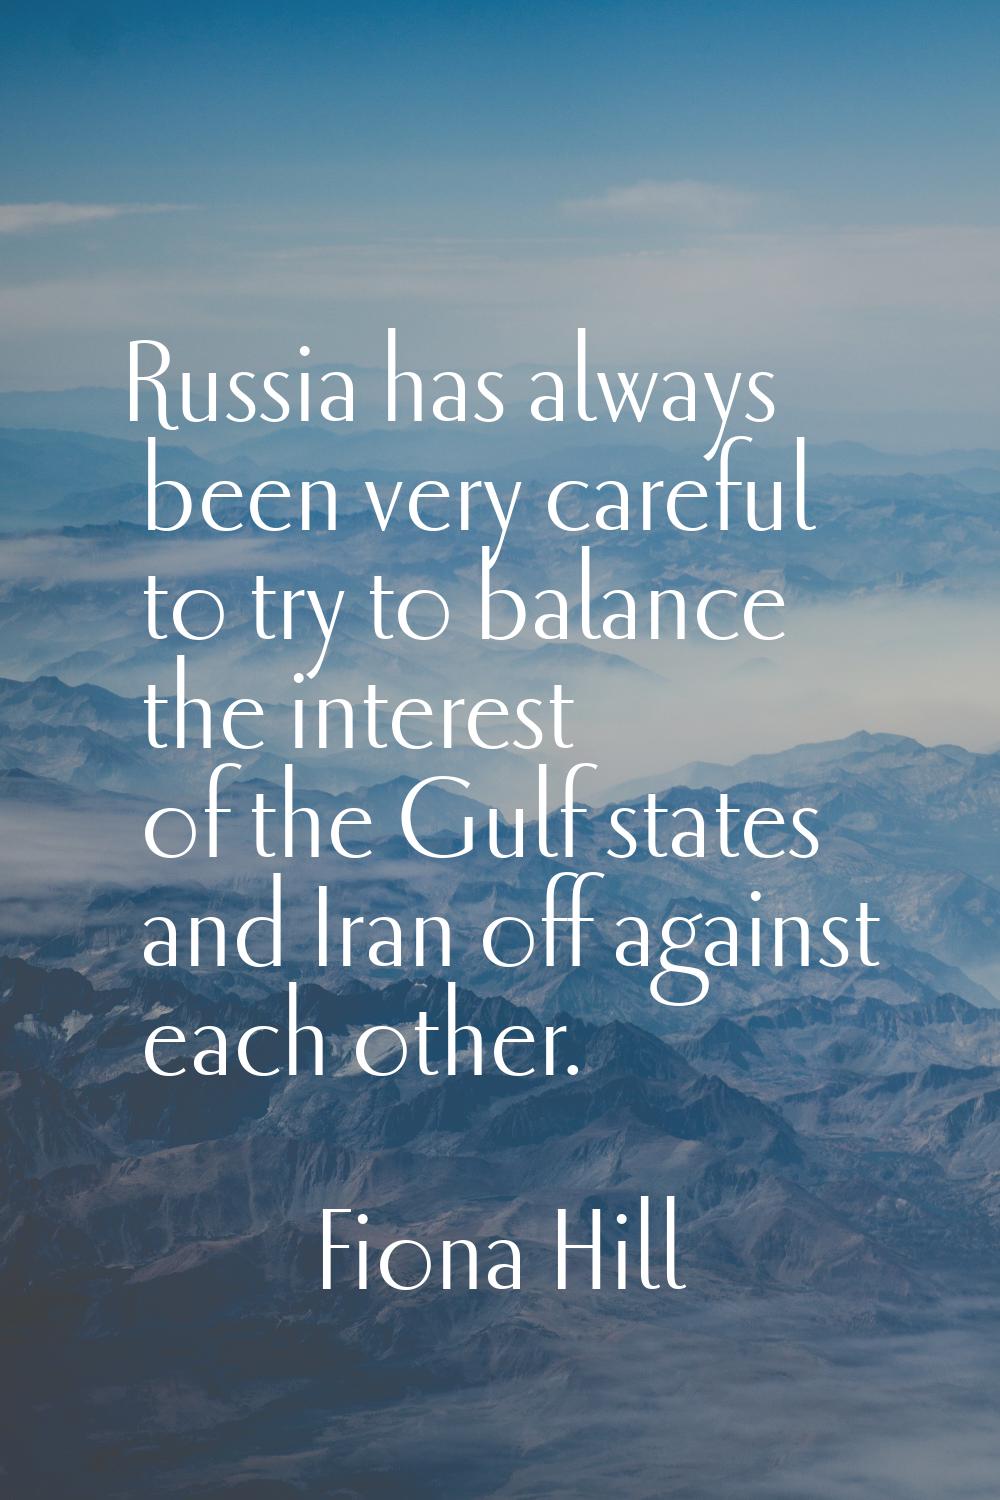 Russia has always been very careful to try to balance the interest of the Gulf states and Iran off 